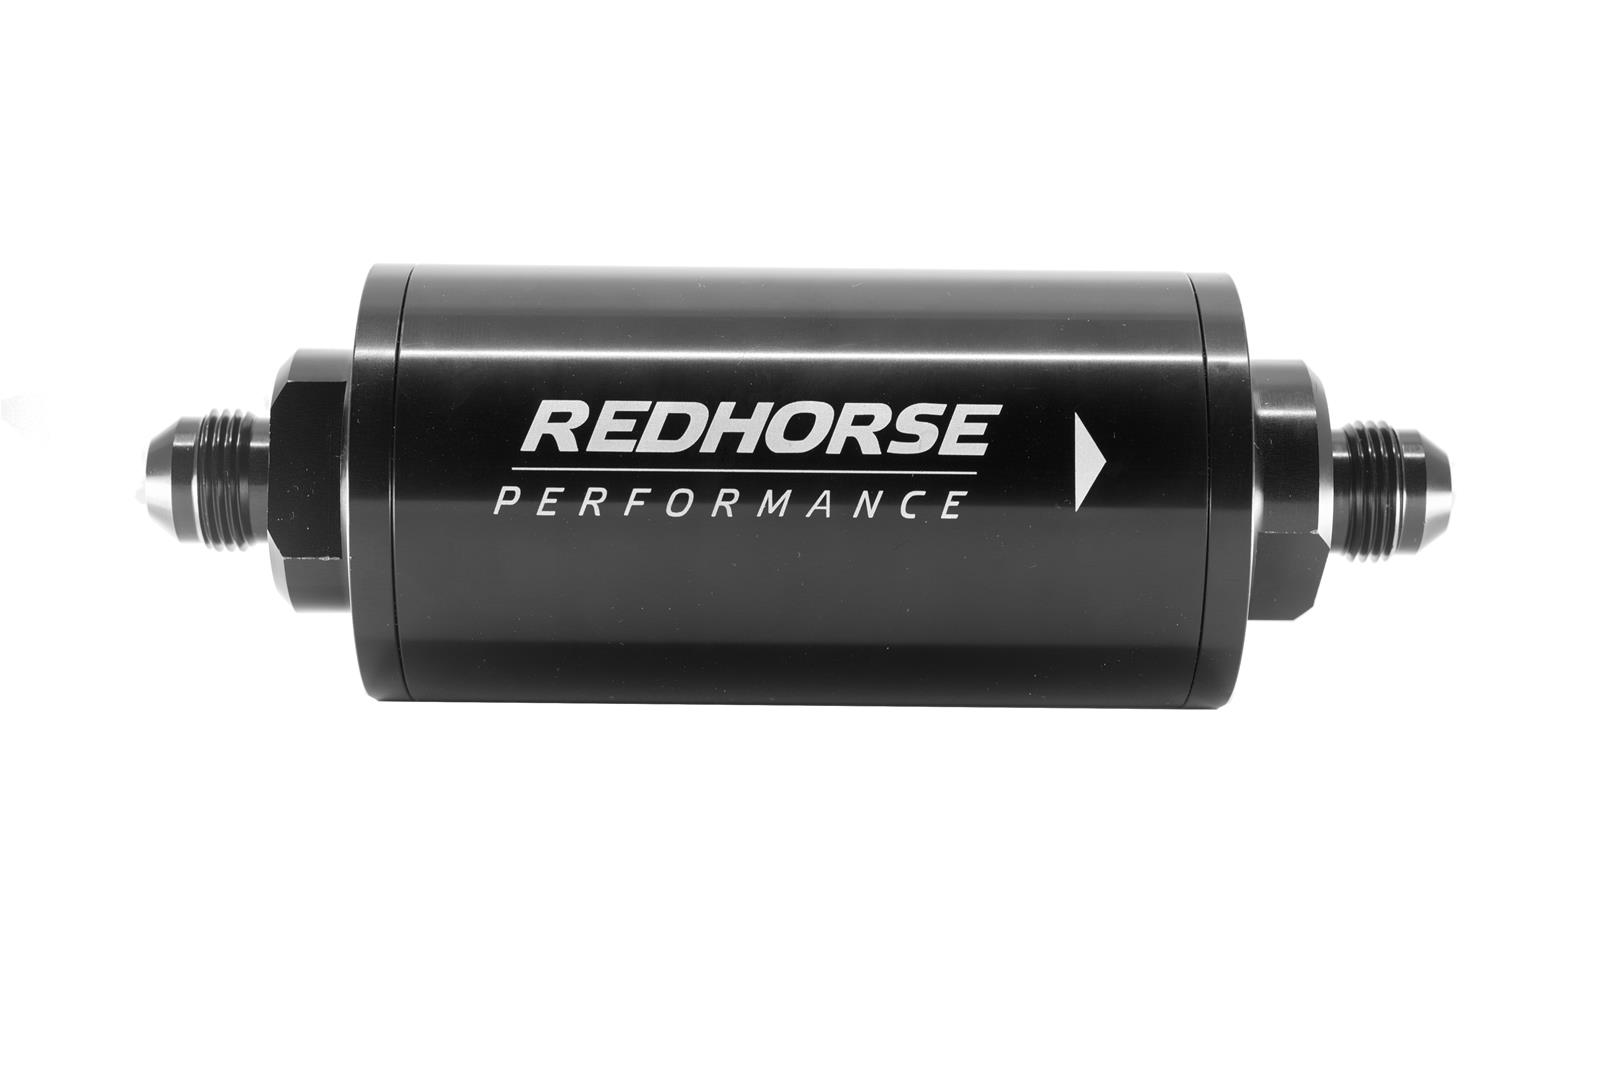 Redhorse Performance 4651-10-2-100 6in Cylindrical In-Line Race Fuel Filter w/ 100 Micron S.S. element - 10 AN